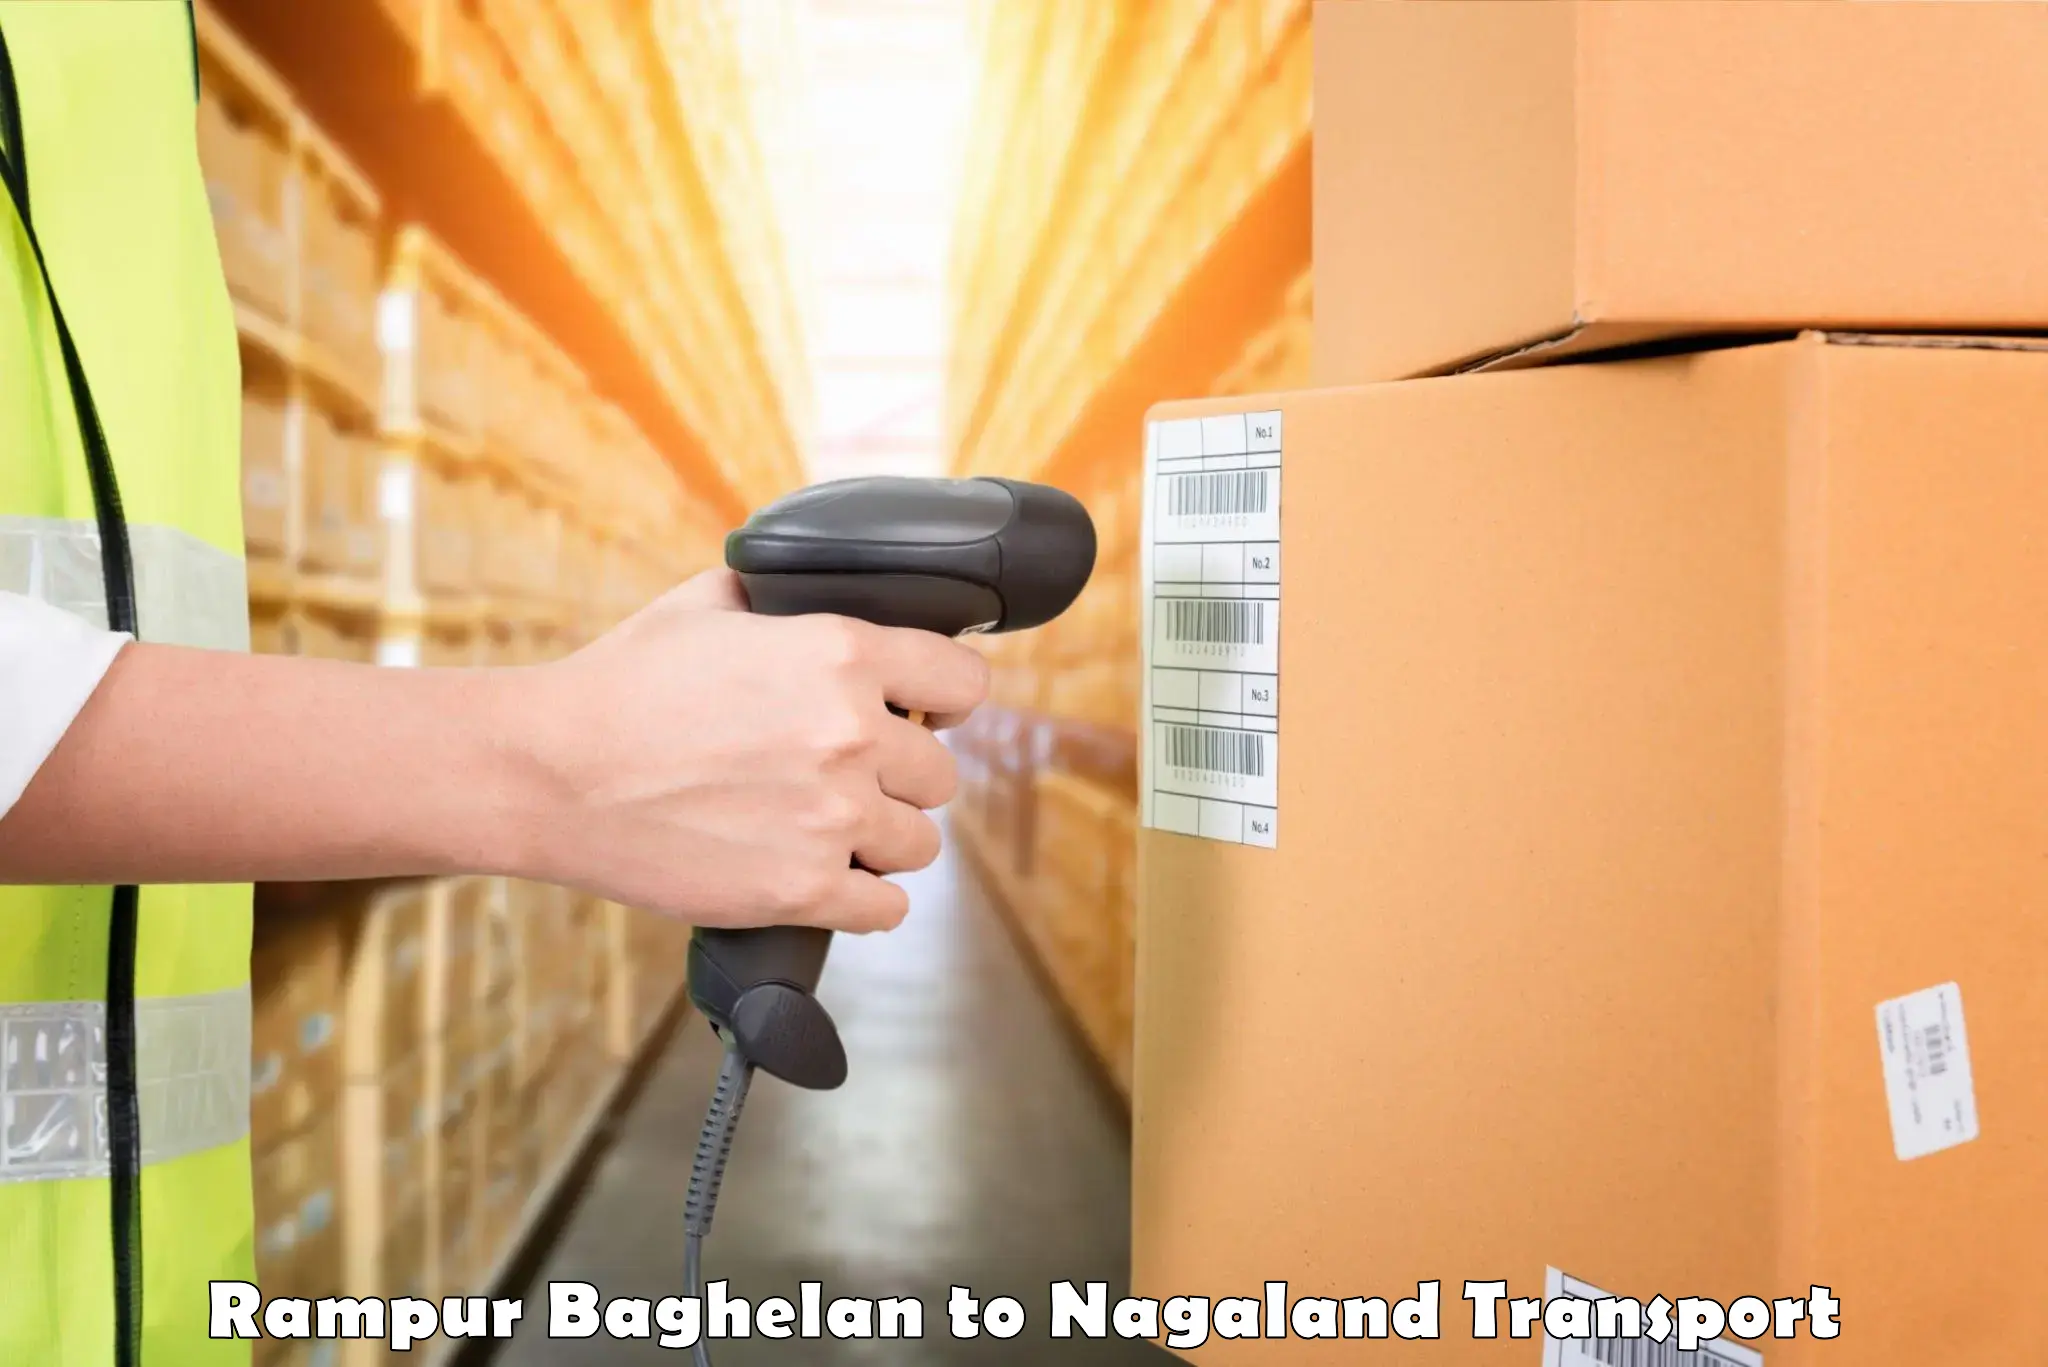 Container transport service Rampur Baghelan to Dimapur